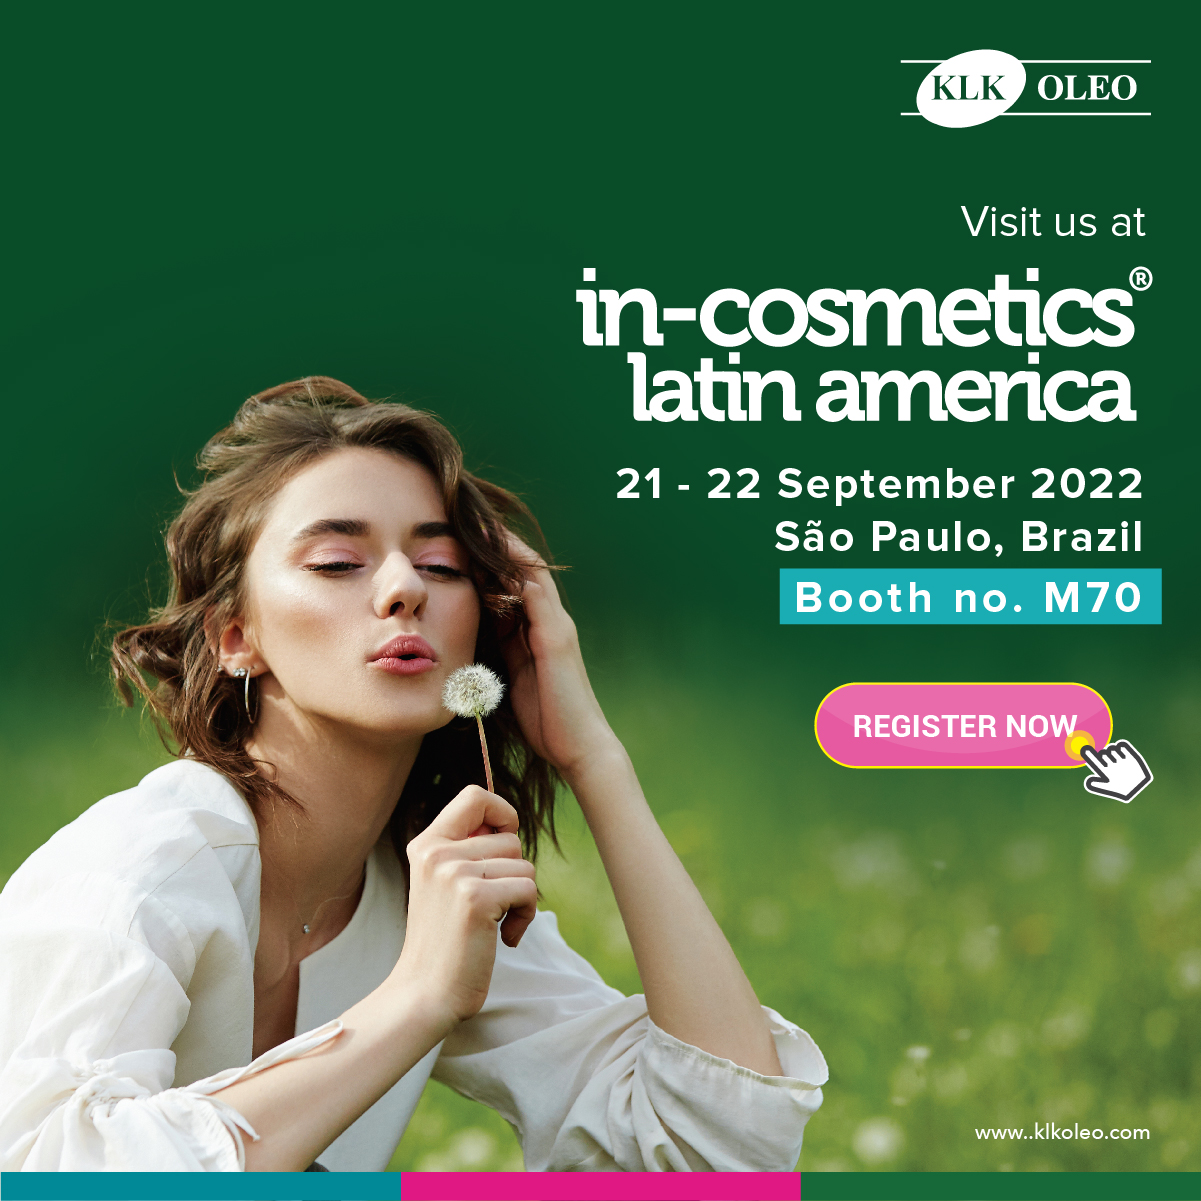 Get in touch with Davos Life Science at in-cosmetics latin america